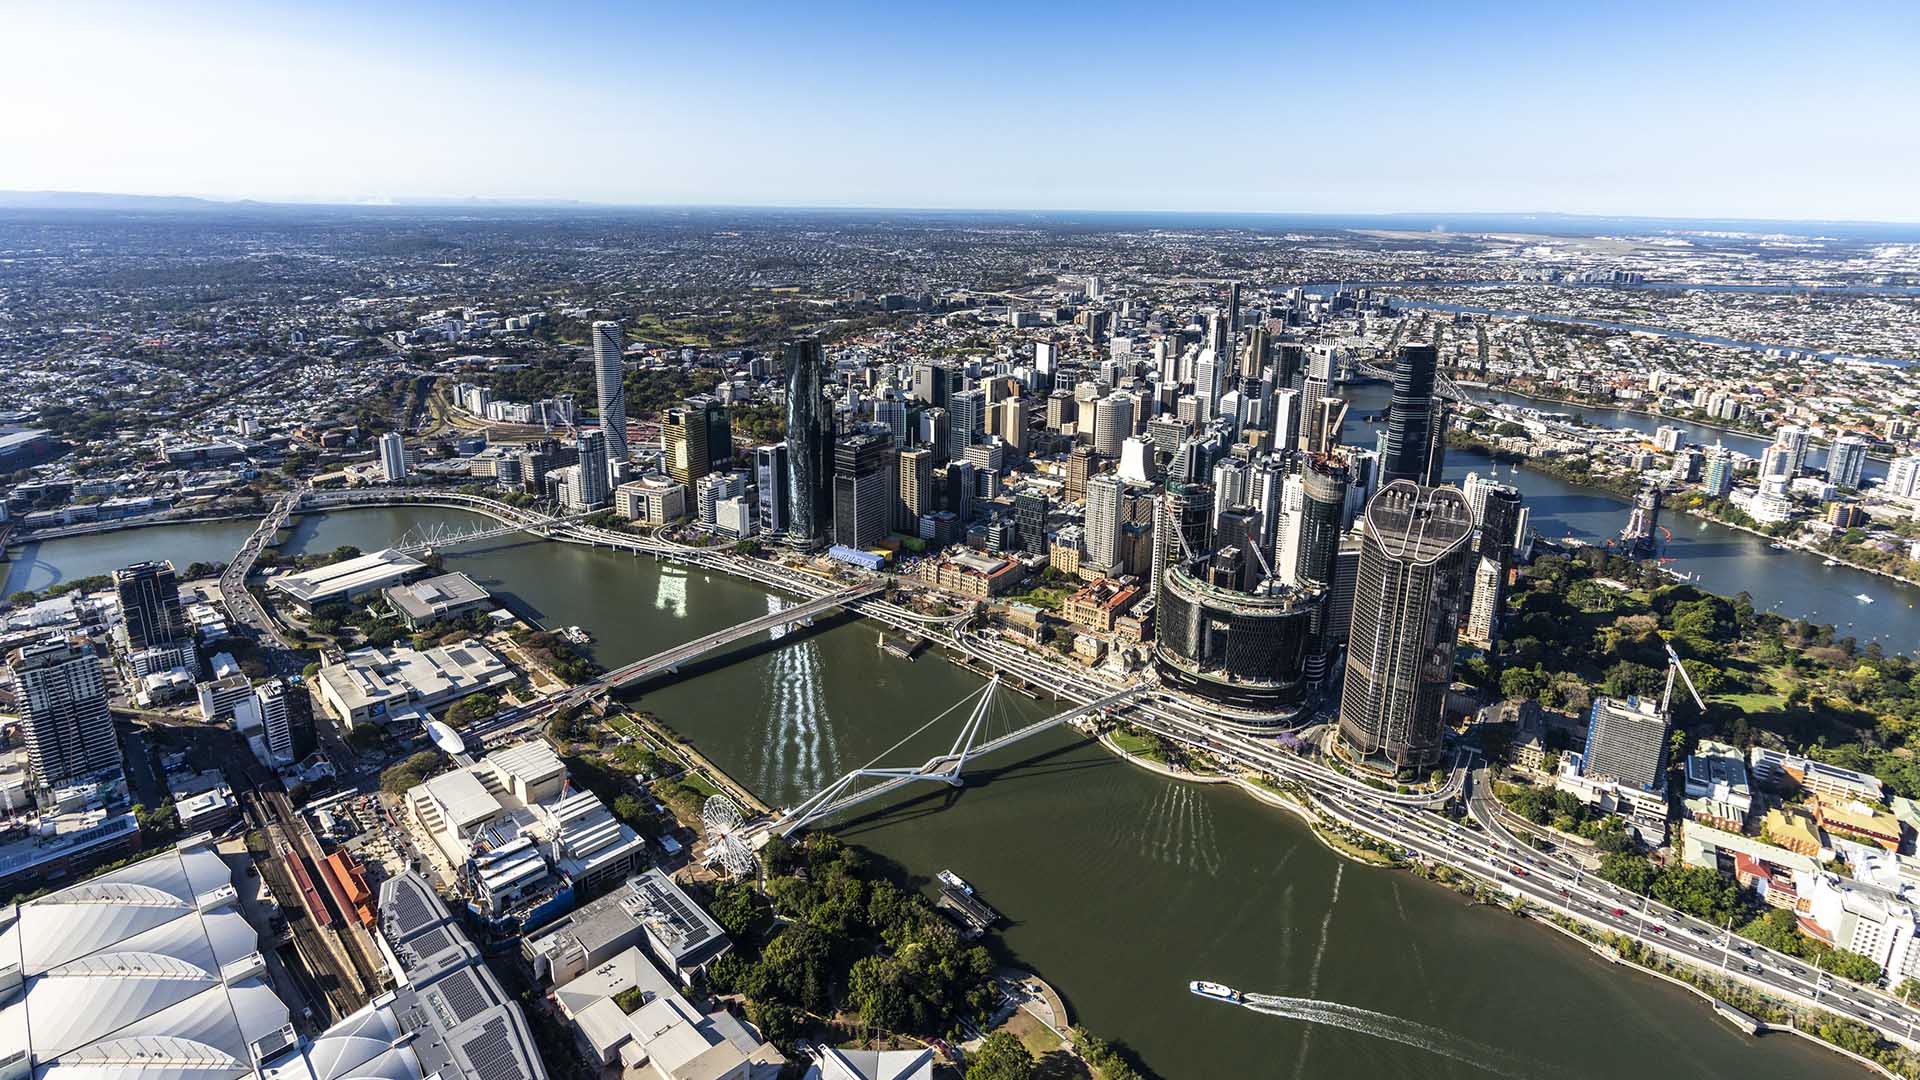 From the Sky Deck to Sokyo, Here's When Everything Will Start Opening at Brisbane's New Queen's Wharf Precinct